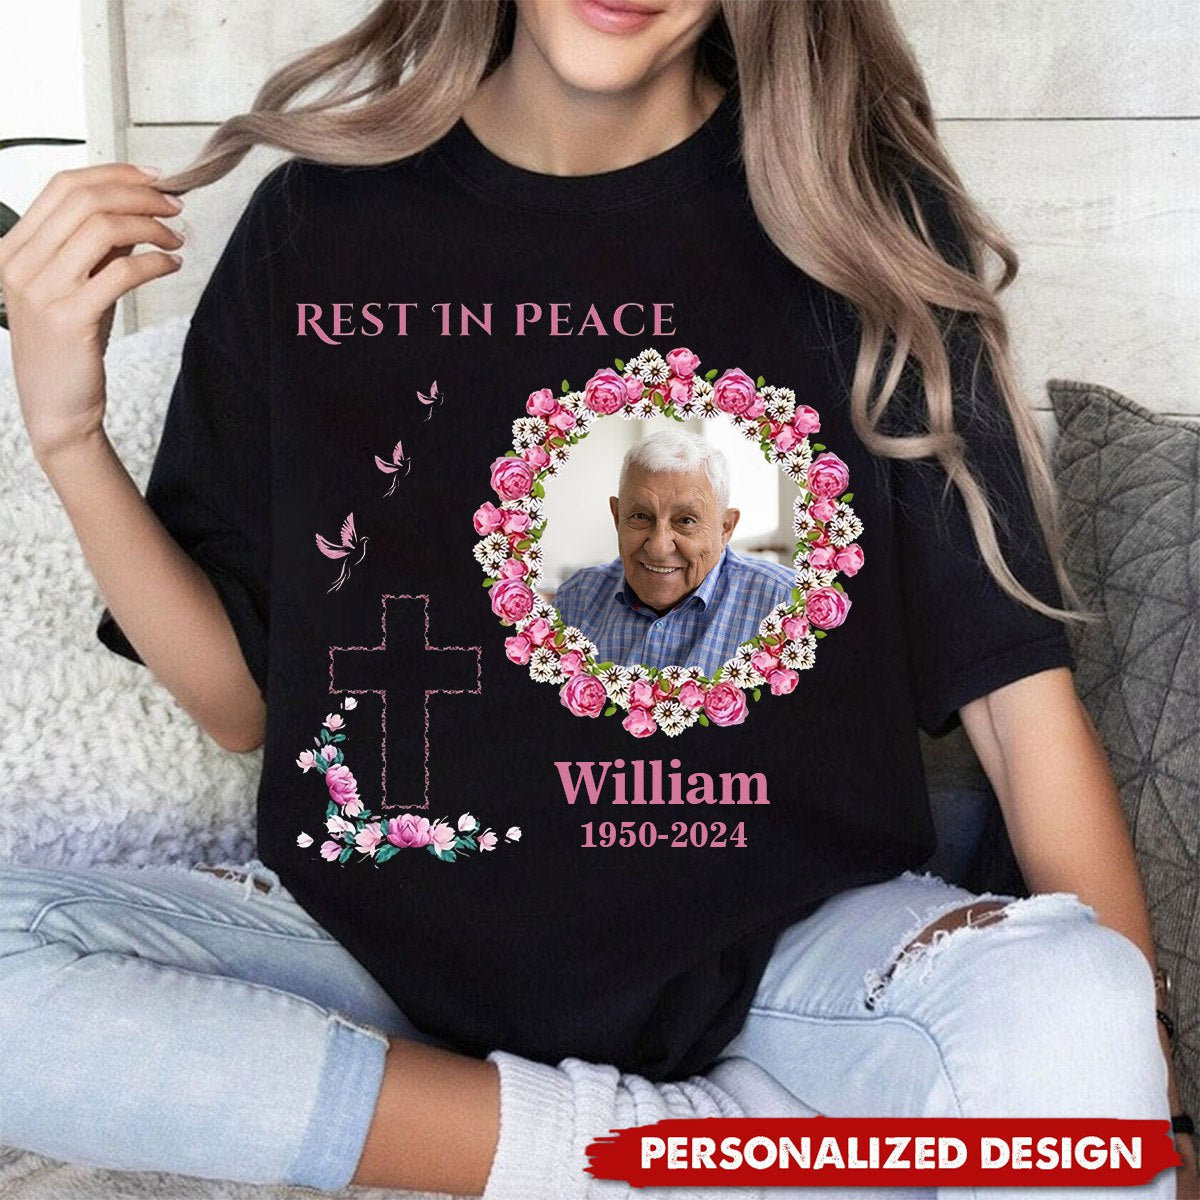 Personalized Rest in Peace Memorial T-Shirt